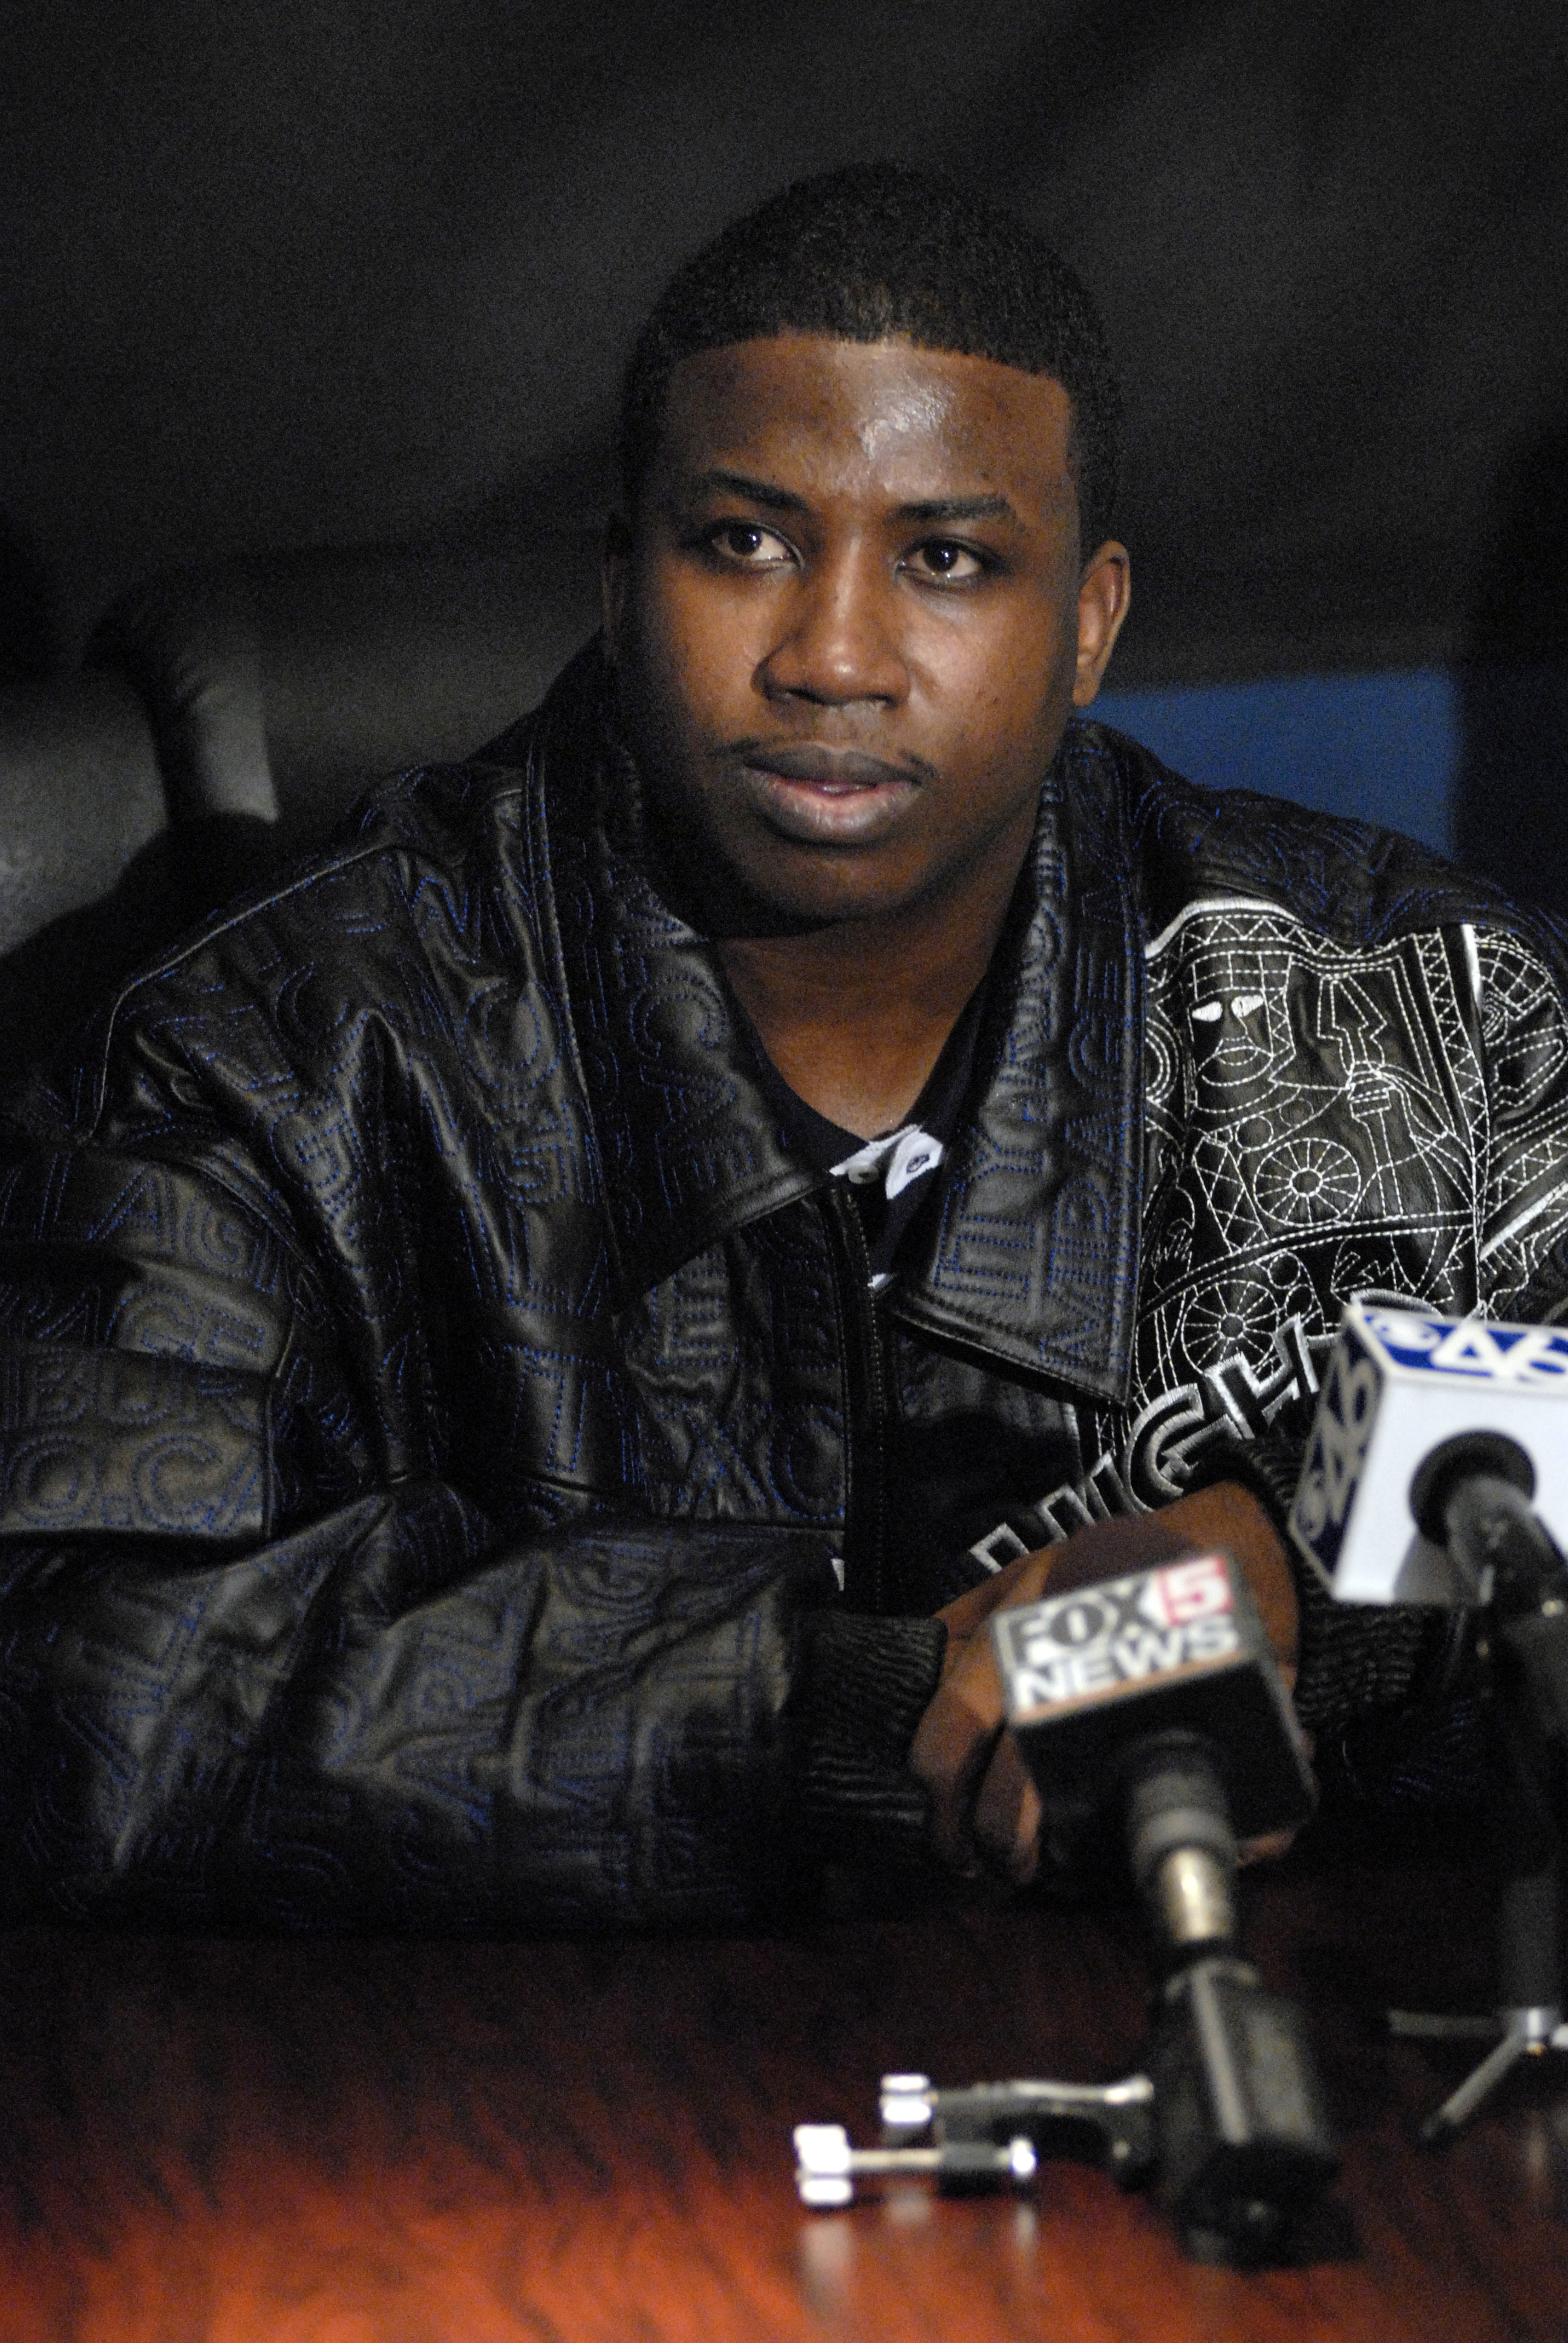 Gucci Mane Press Conference After His Release from Jail - January 17, 2006